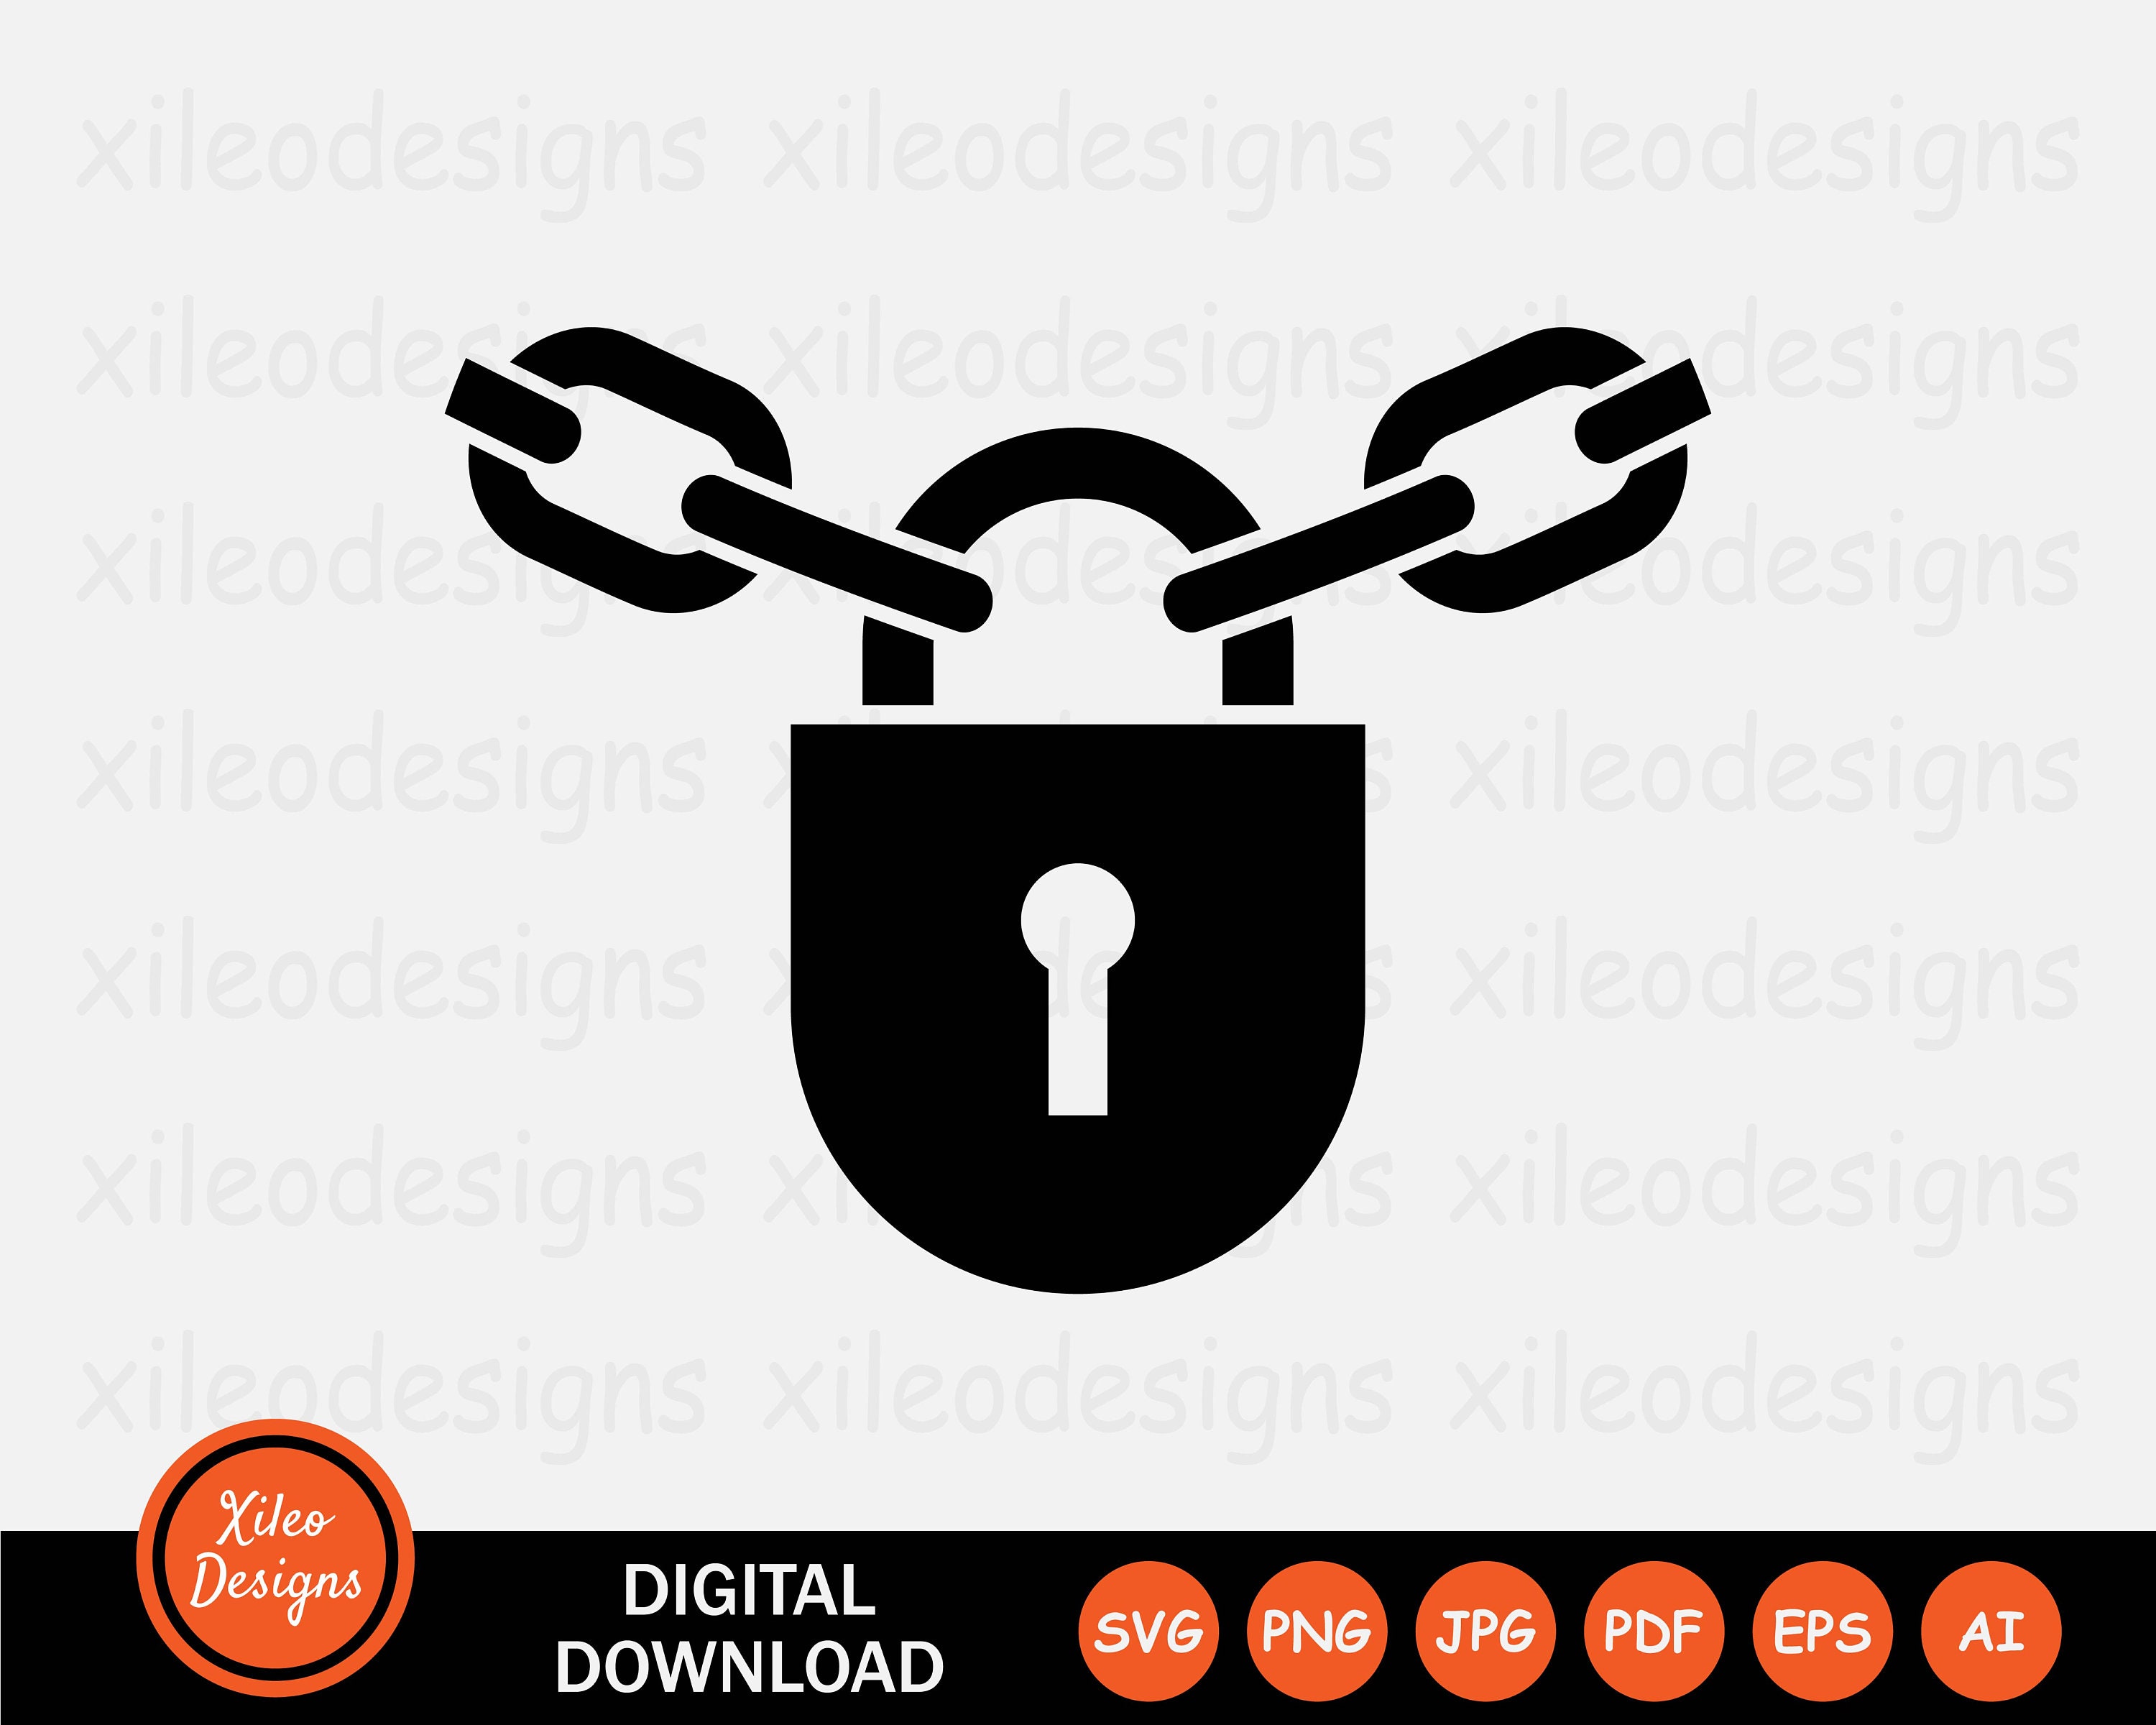 Illustration Of Metal Chain And Lock Royalty Free SVG, Cliparts